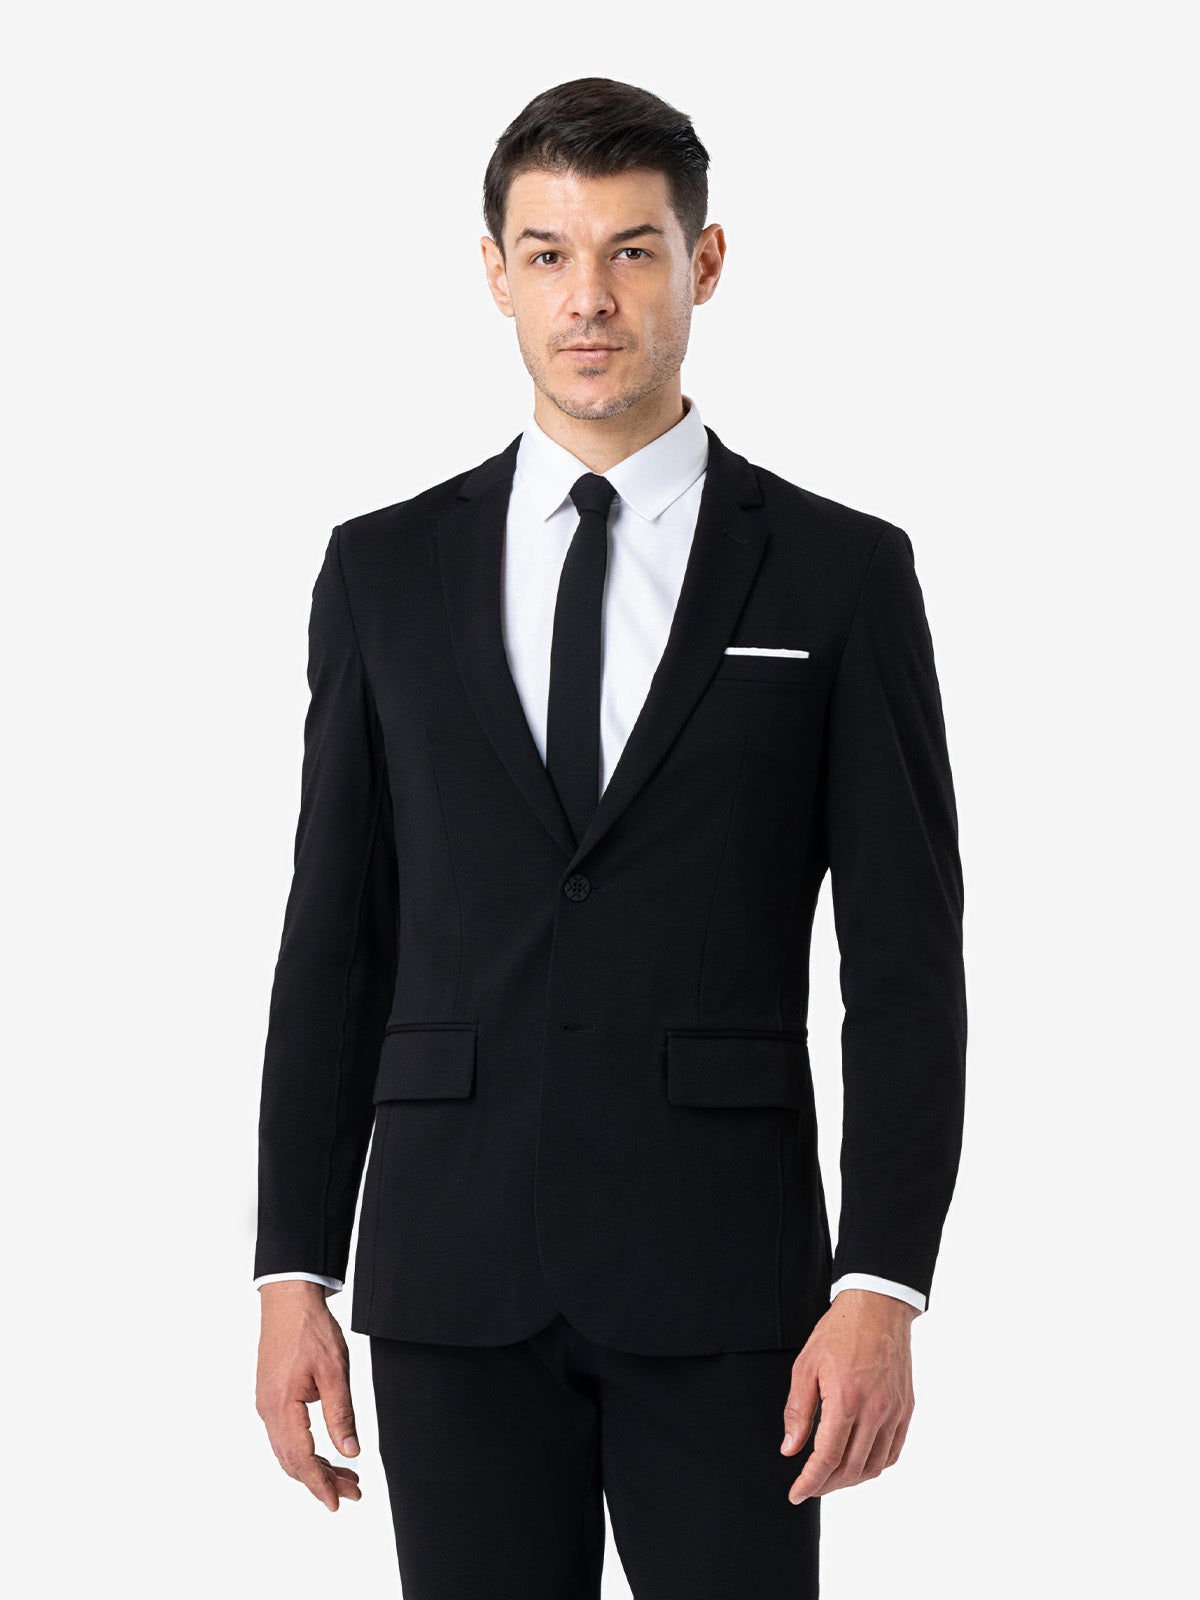 Men suits black have long been synonymous with sophistication, elegance, and timeless style. From formal events